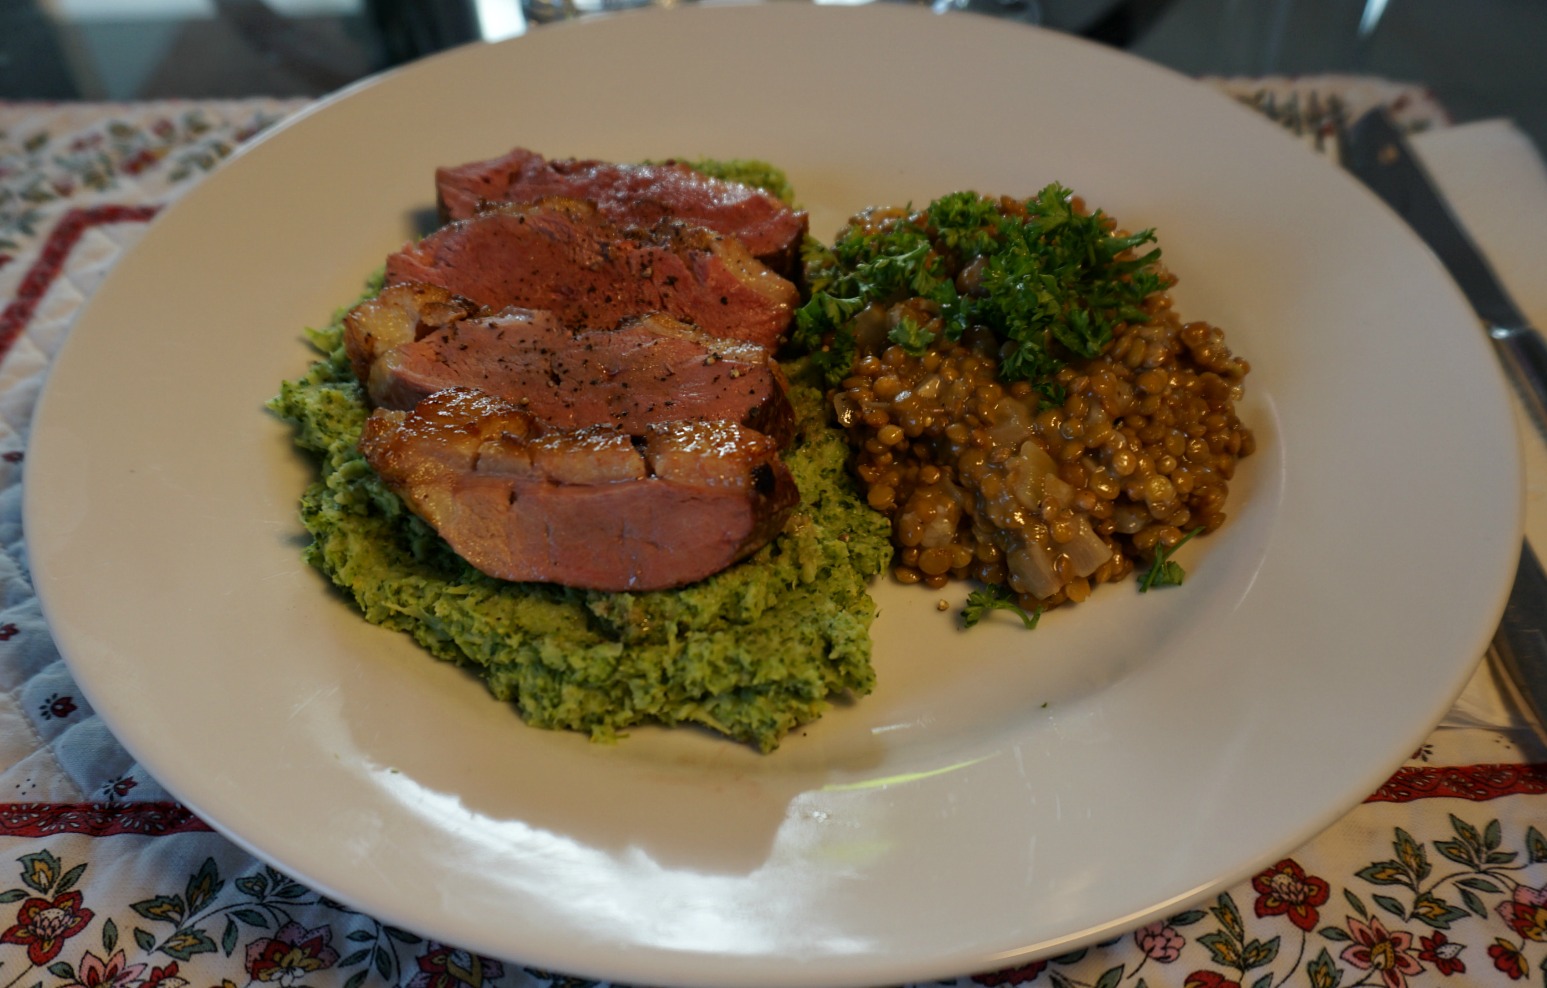 Duck breast, blond lentil risotto and broccoli purée